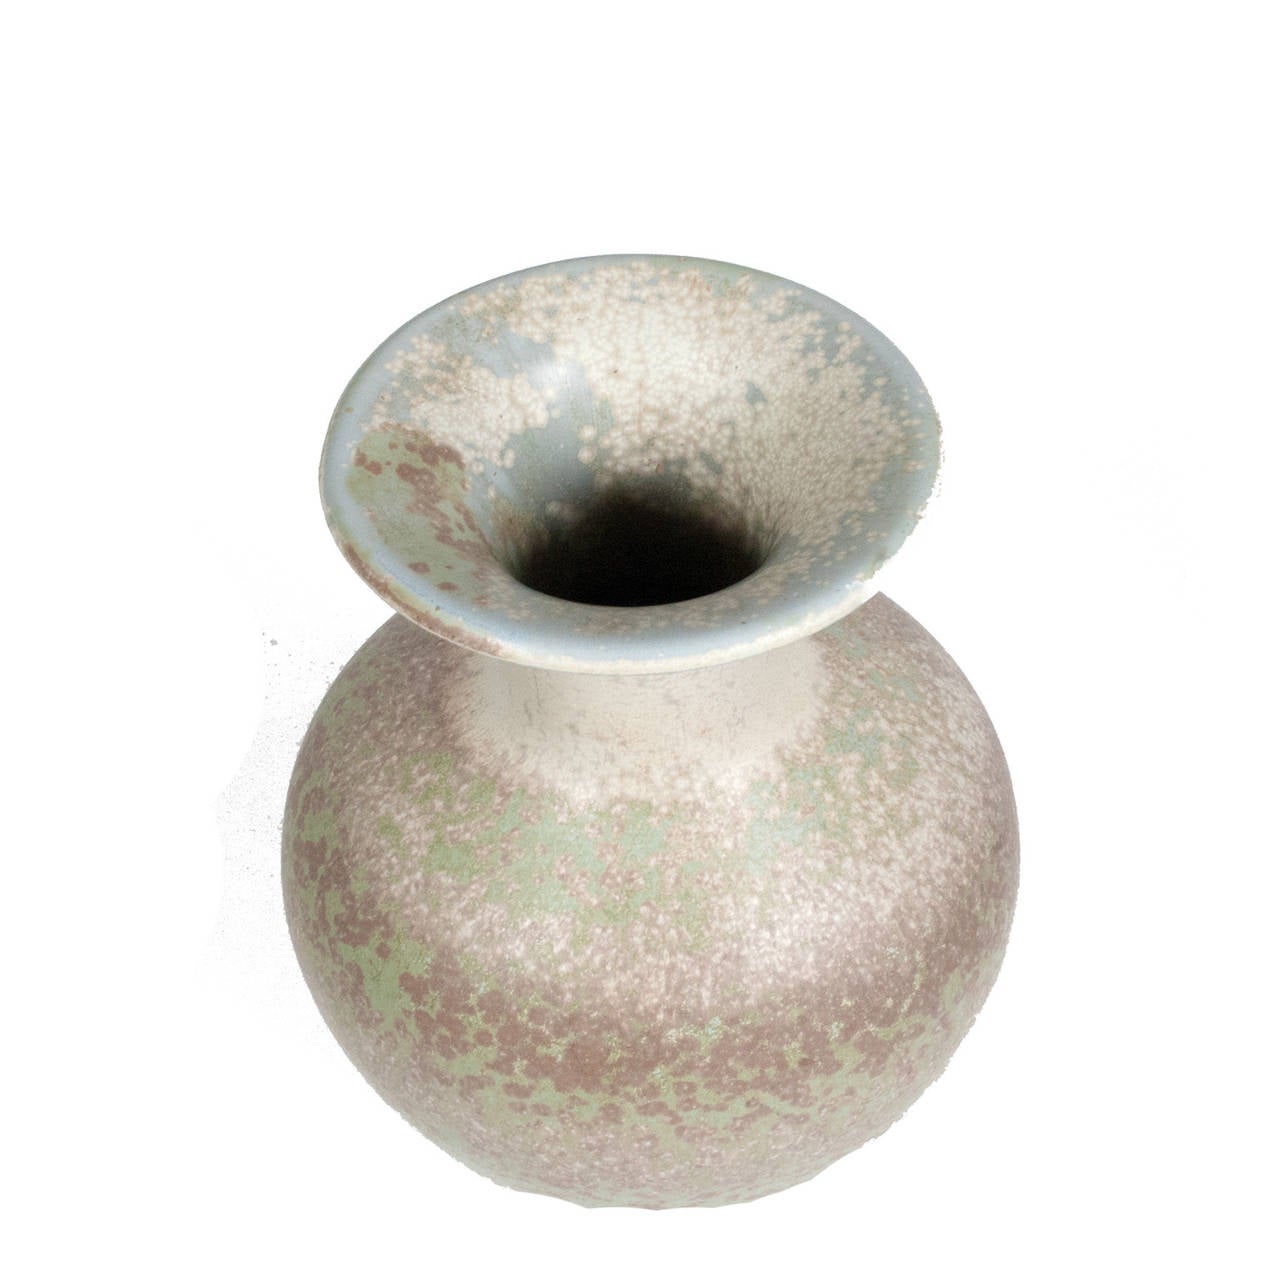 Classical shaped vase with mottled egg shell glaze. Made by Rorstrand. Design in 1940s. Similar example Svensk 1900tals keramik page 91.